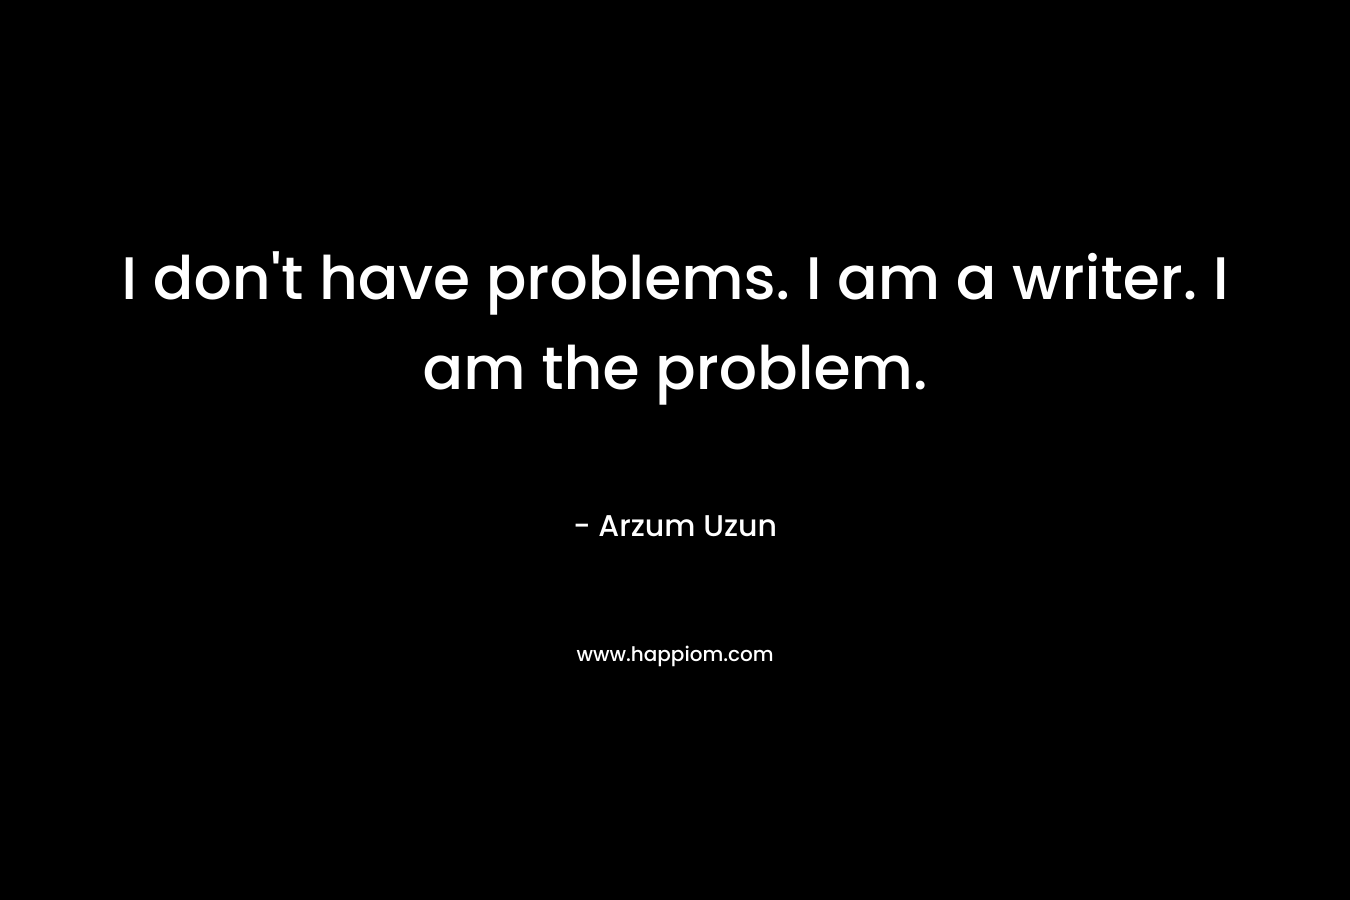 I don't have problems. I am a writer. I am the problem.